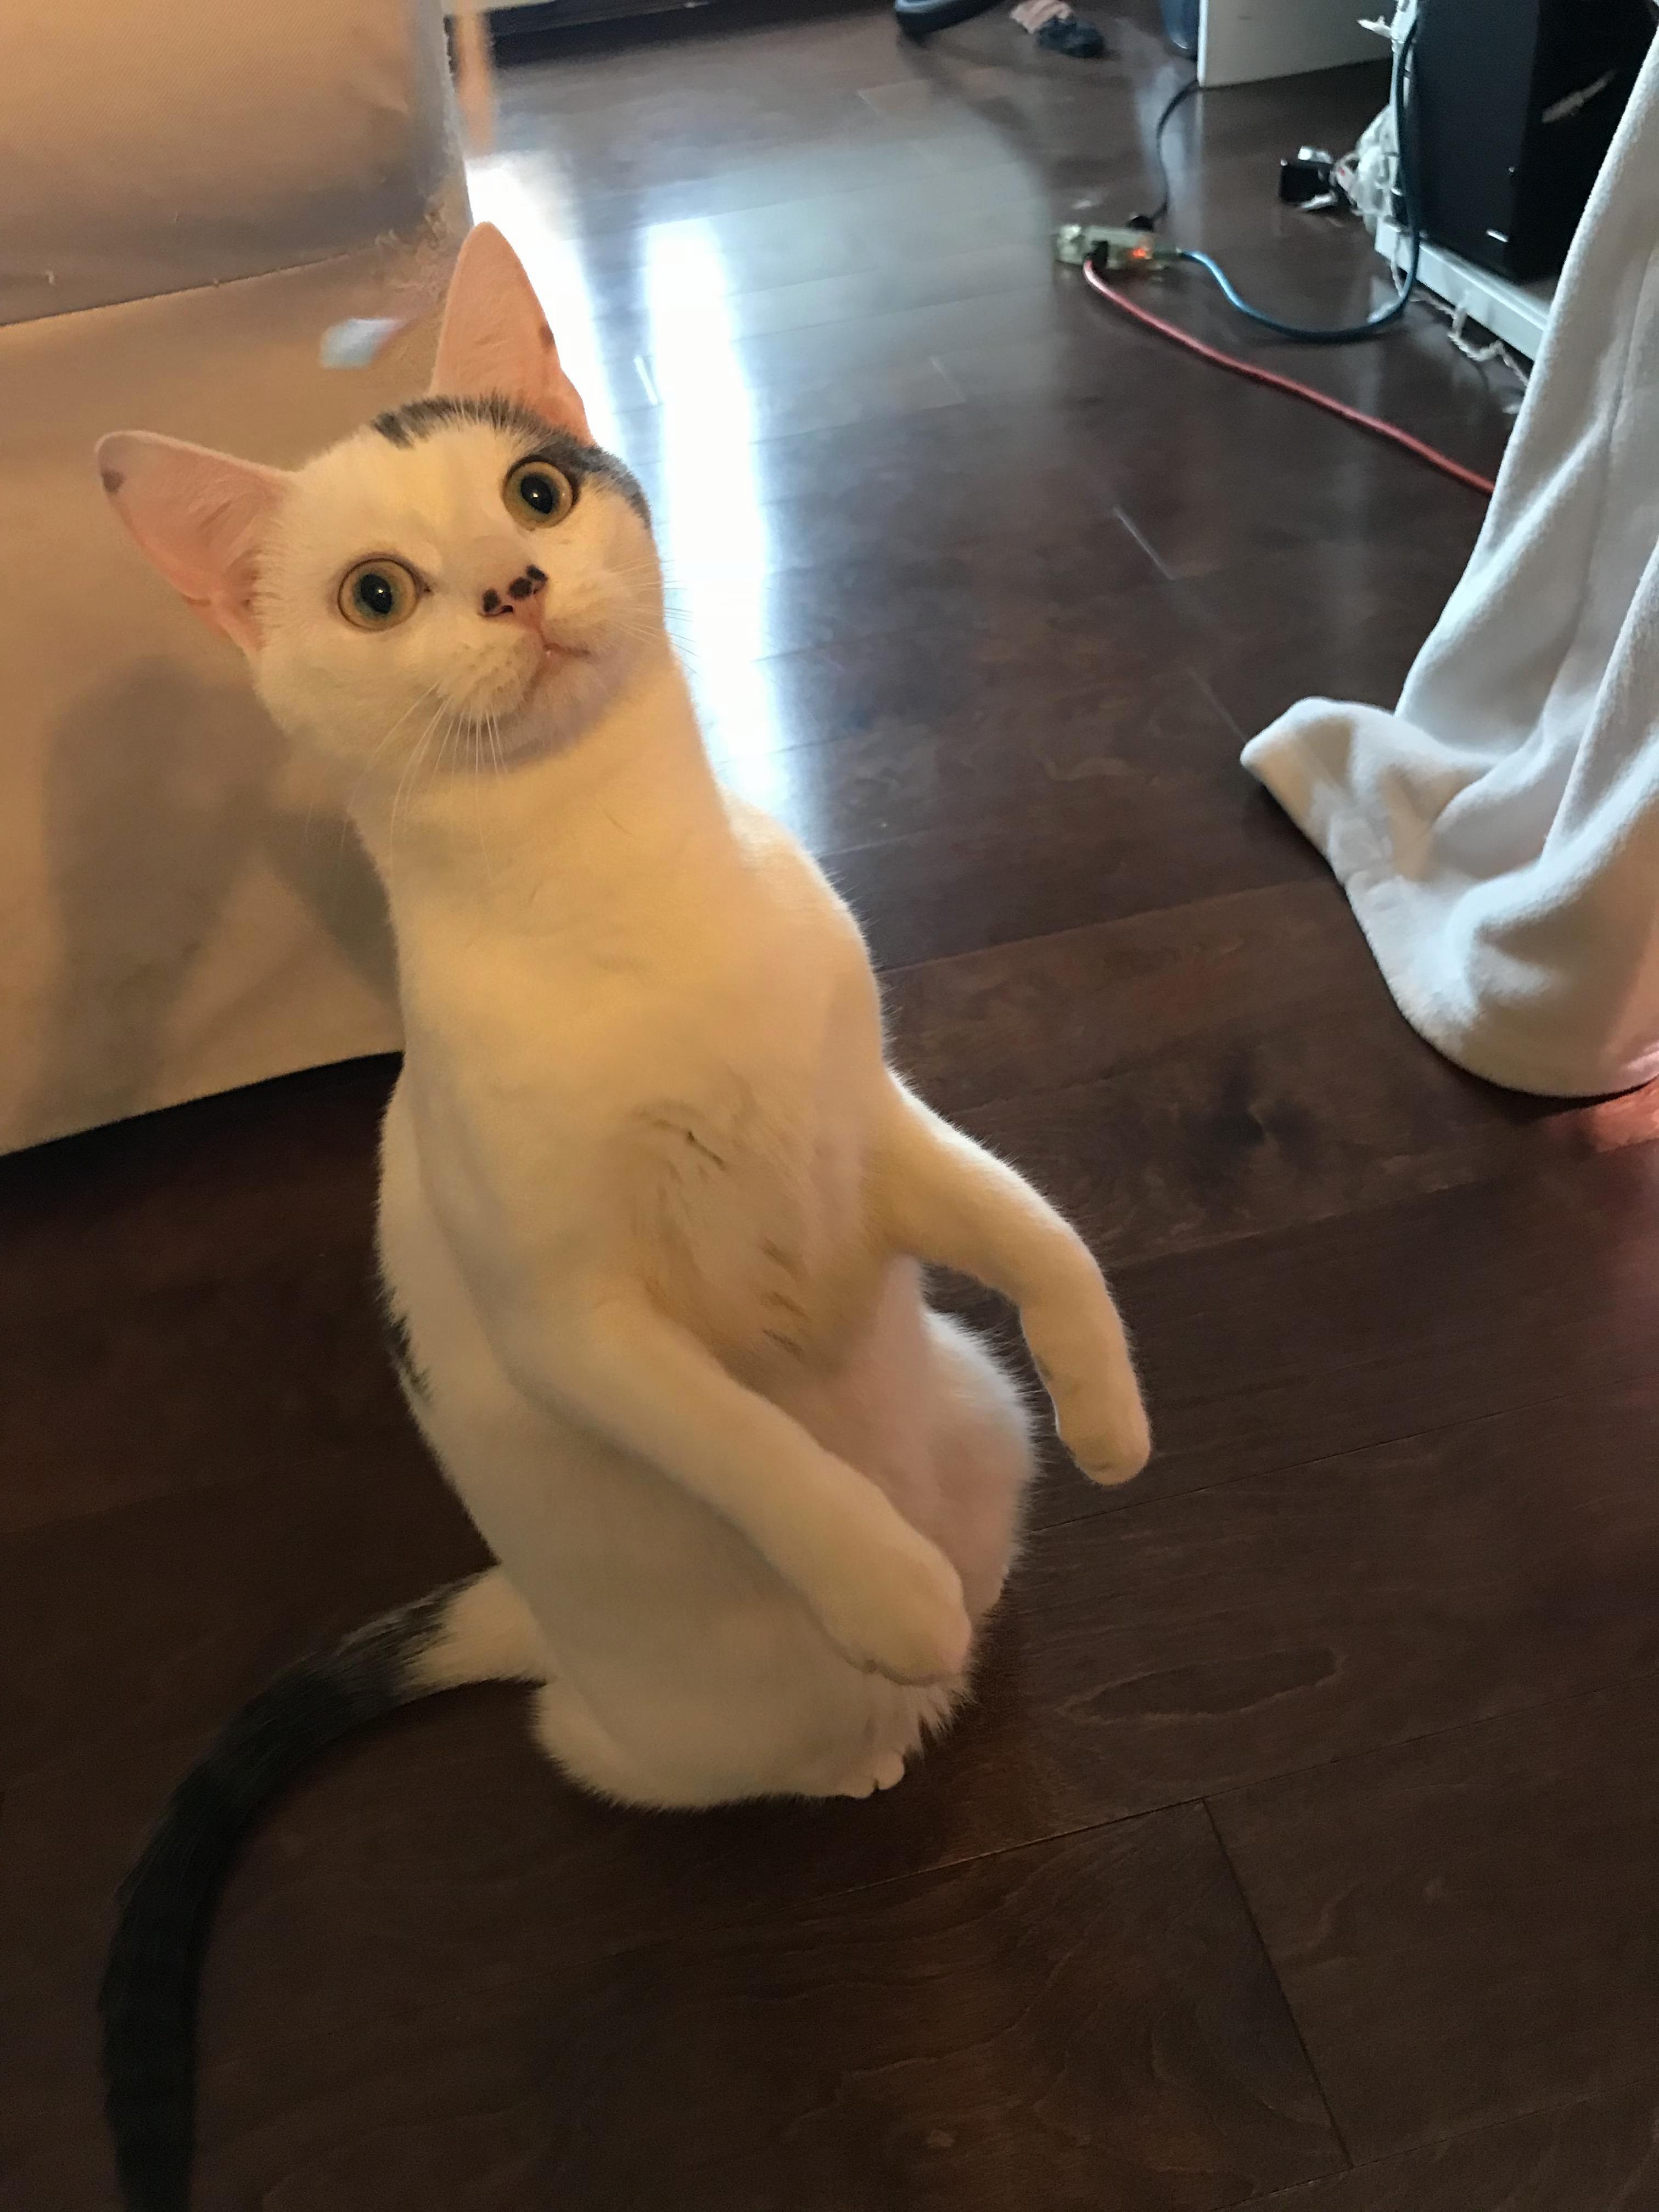 Hi! my name is casper. i have a big body and a small head. i also have 3 little dots on my nose, and 2 big dots on my side. my favourite thing is belly rubs!